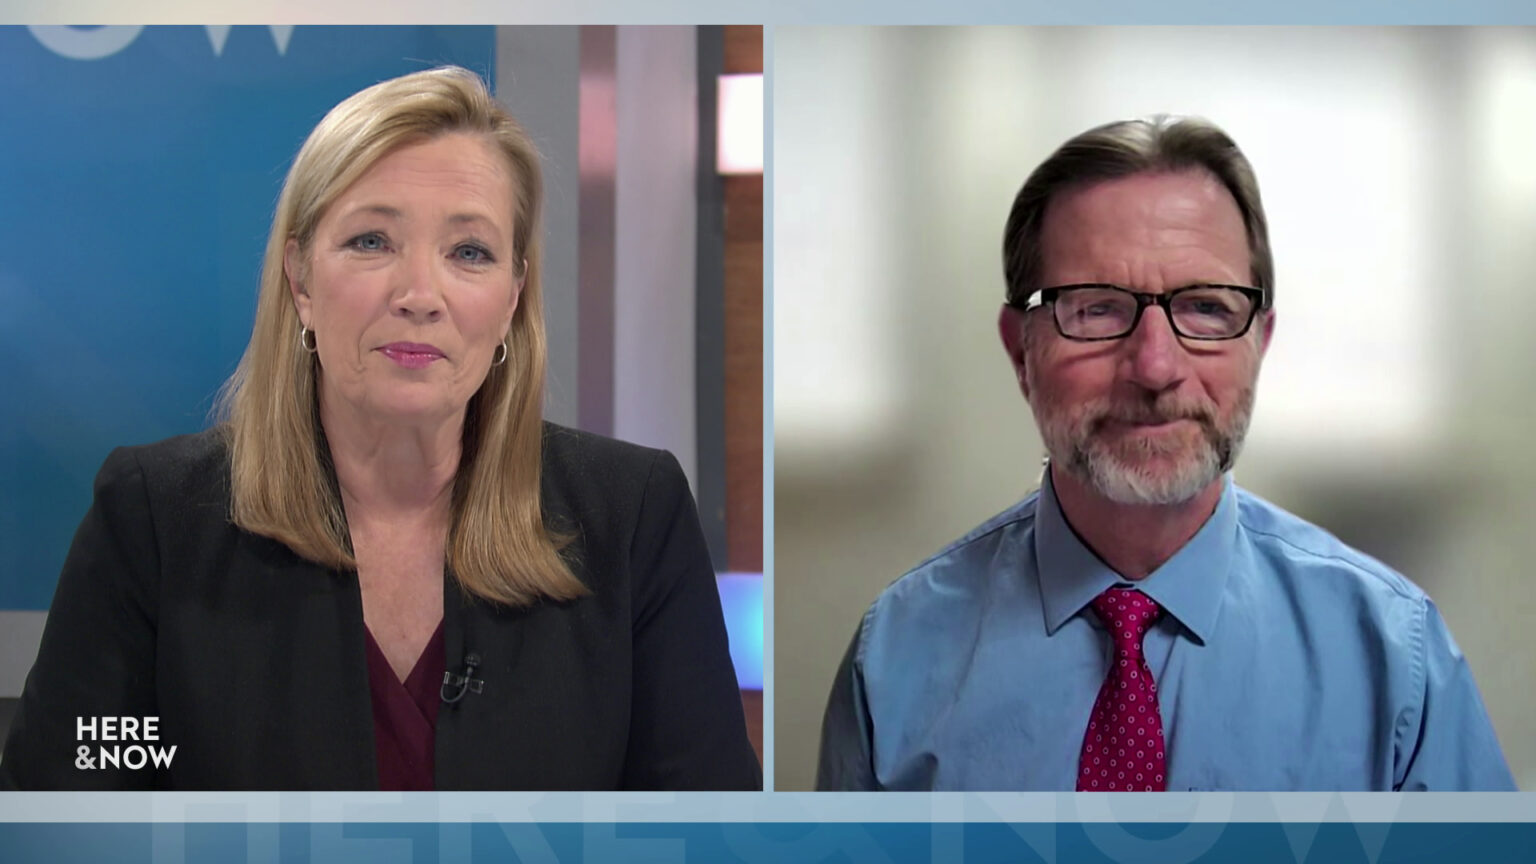 A split screen shows Frederica Freyberg and Jim Zellmer in different locations.